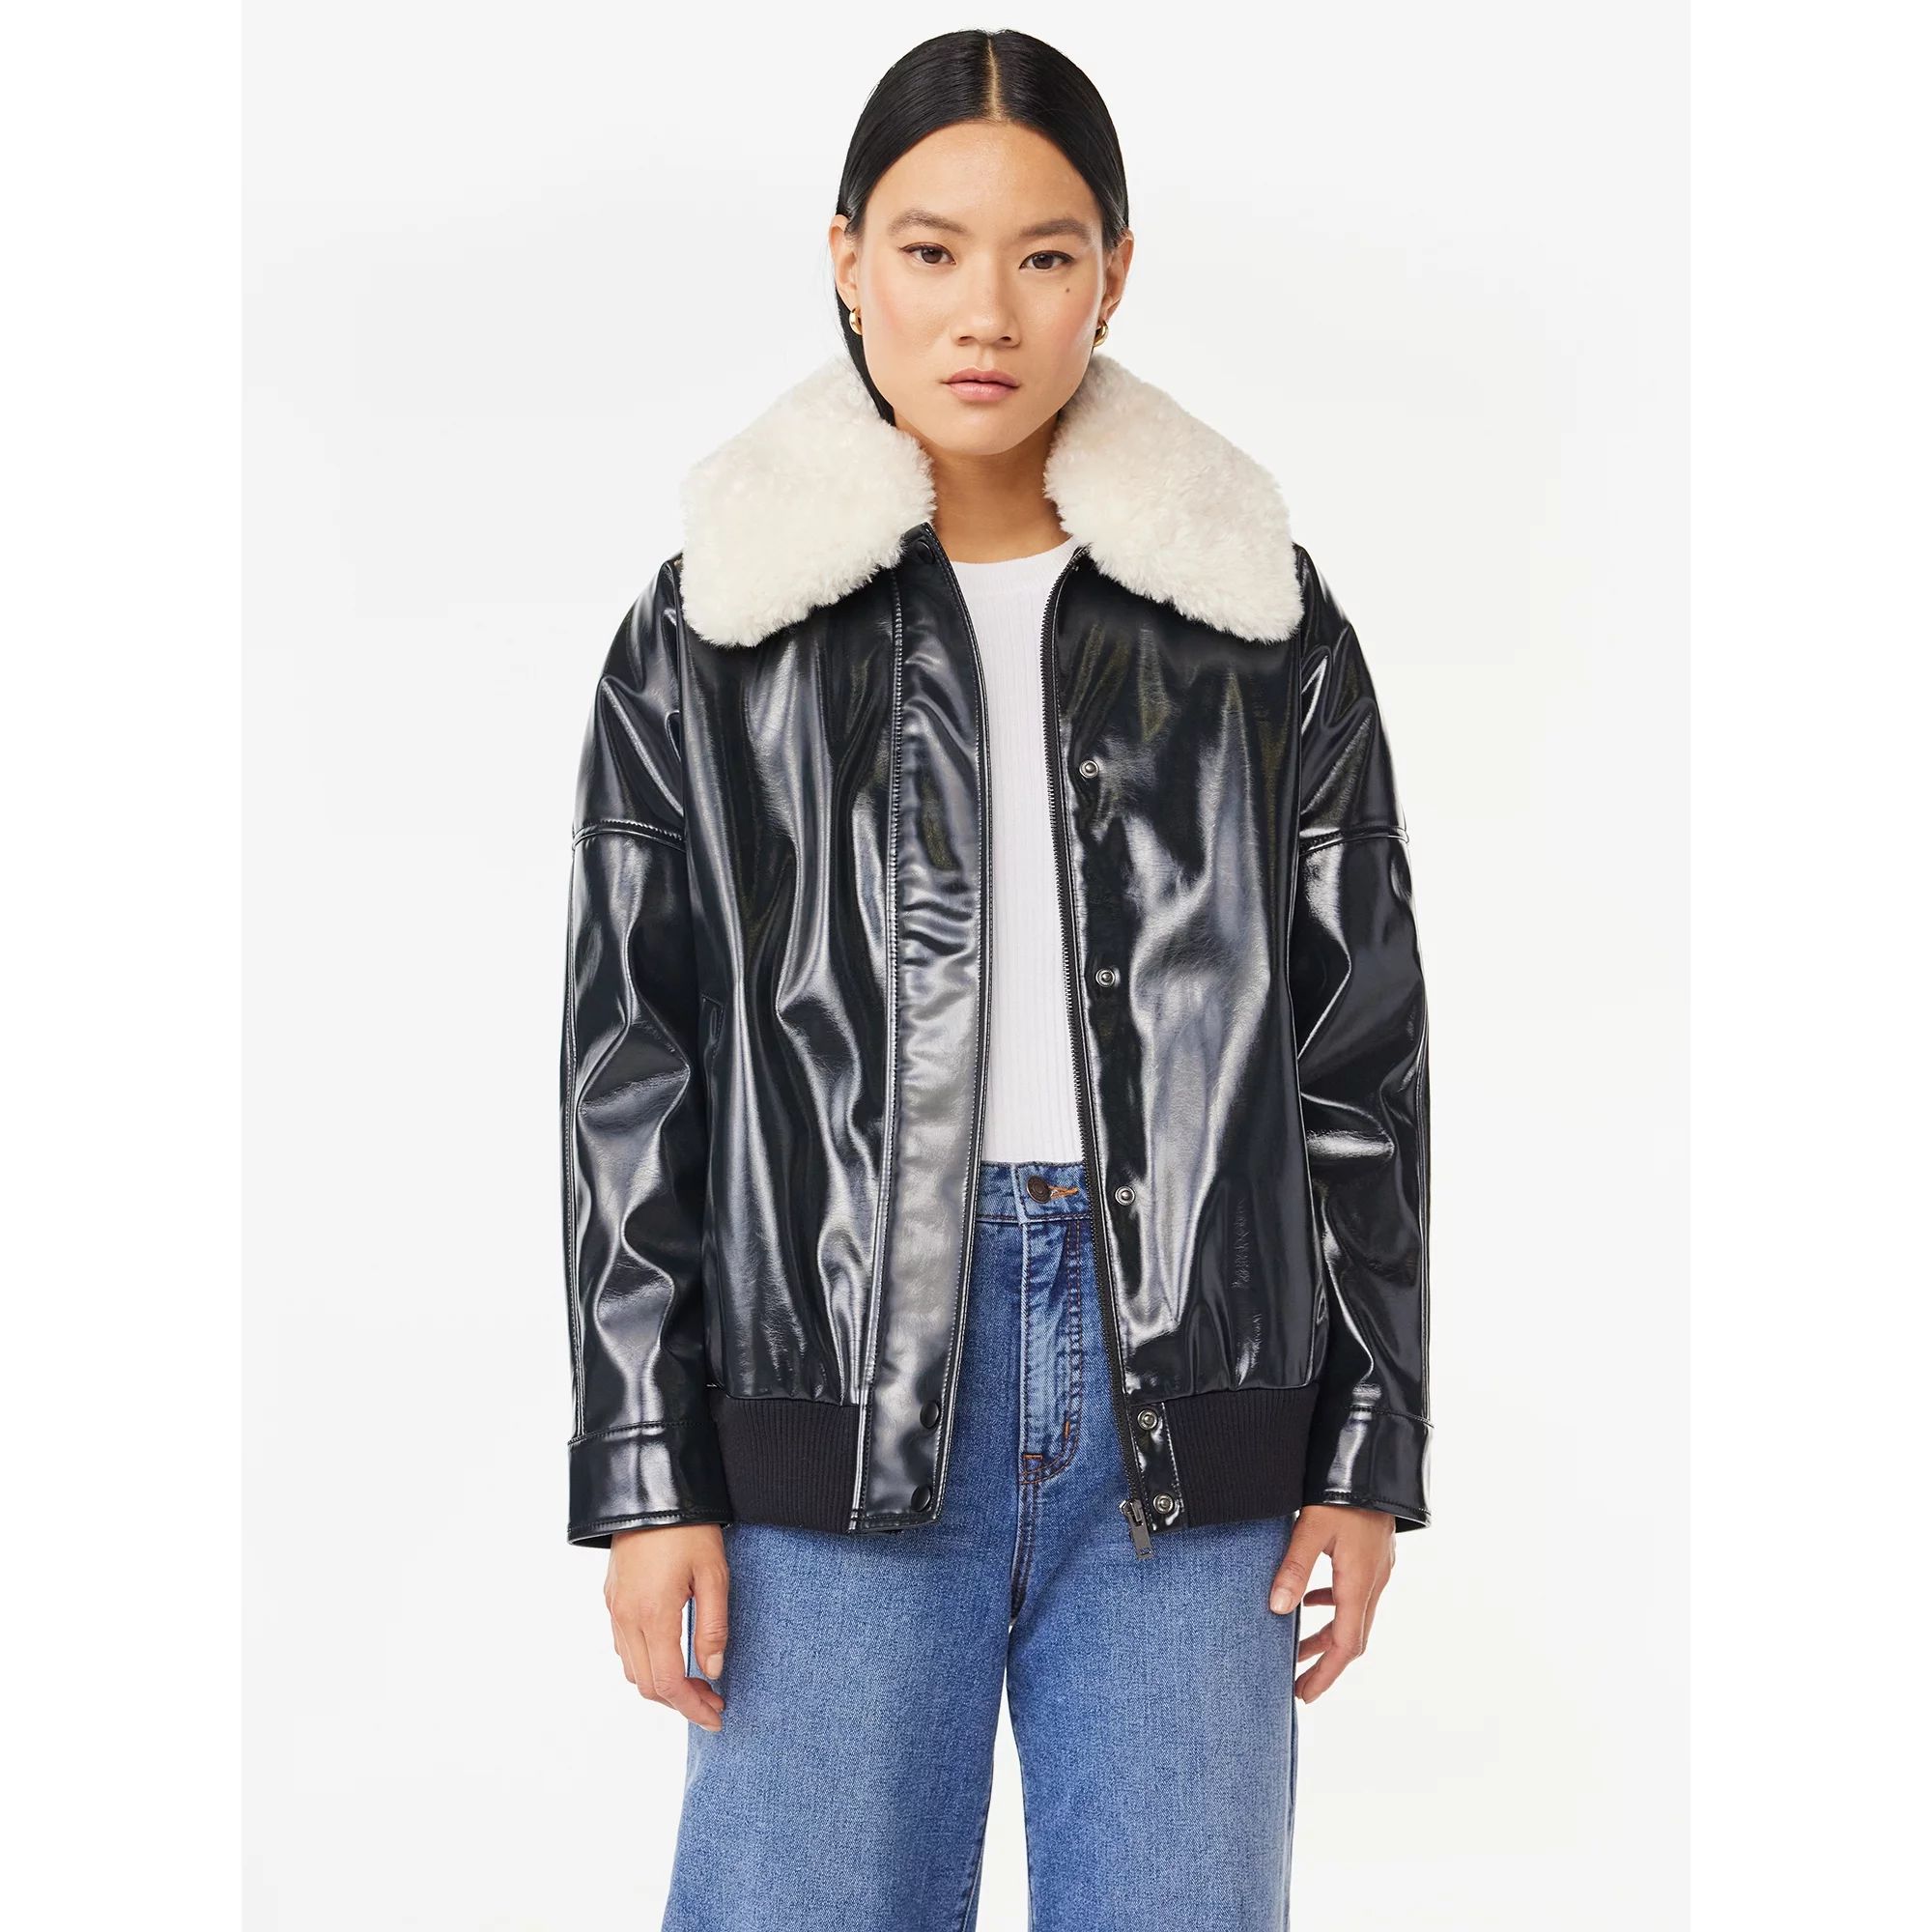 Scoop Women's Oversized Faux Leather Jacket with Faux Fur Collar, Sizes XS-2XL | Walmart (US)